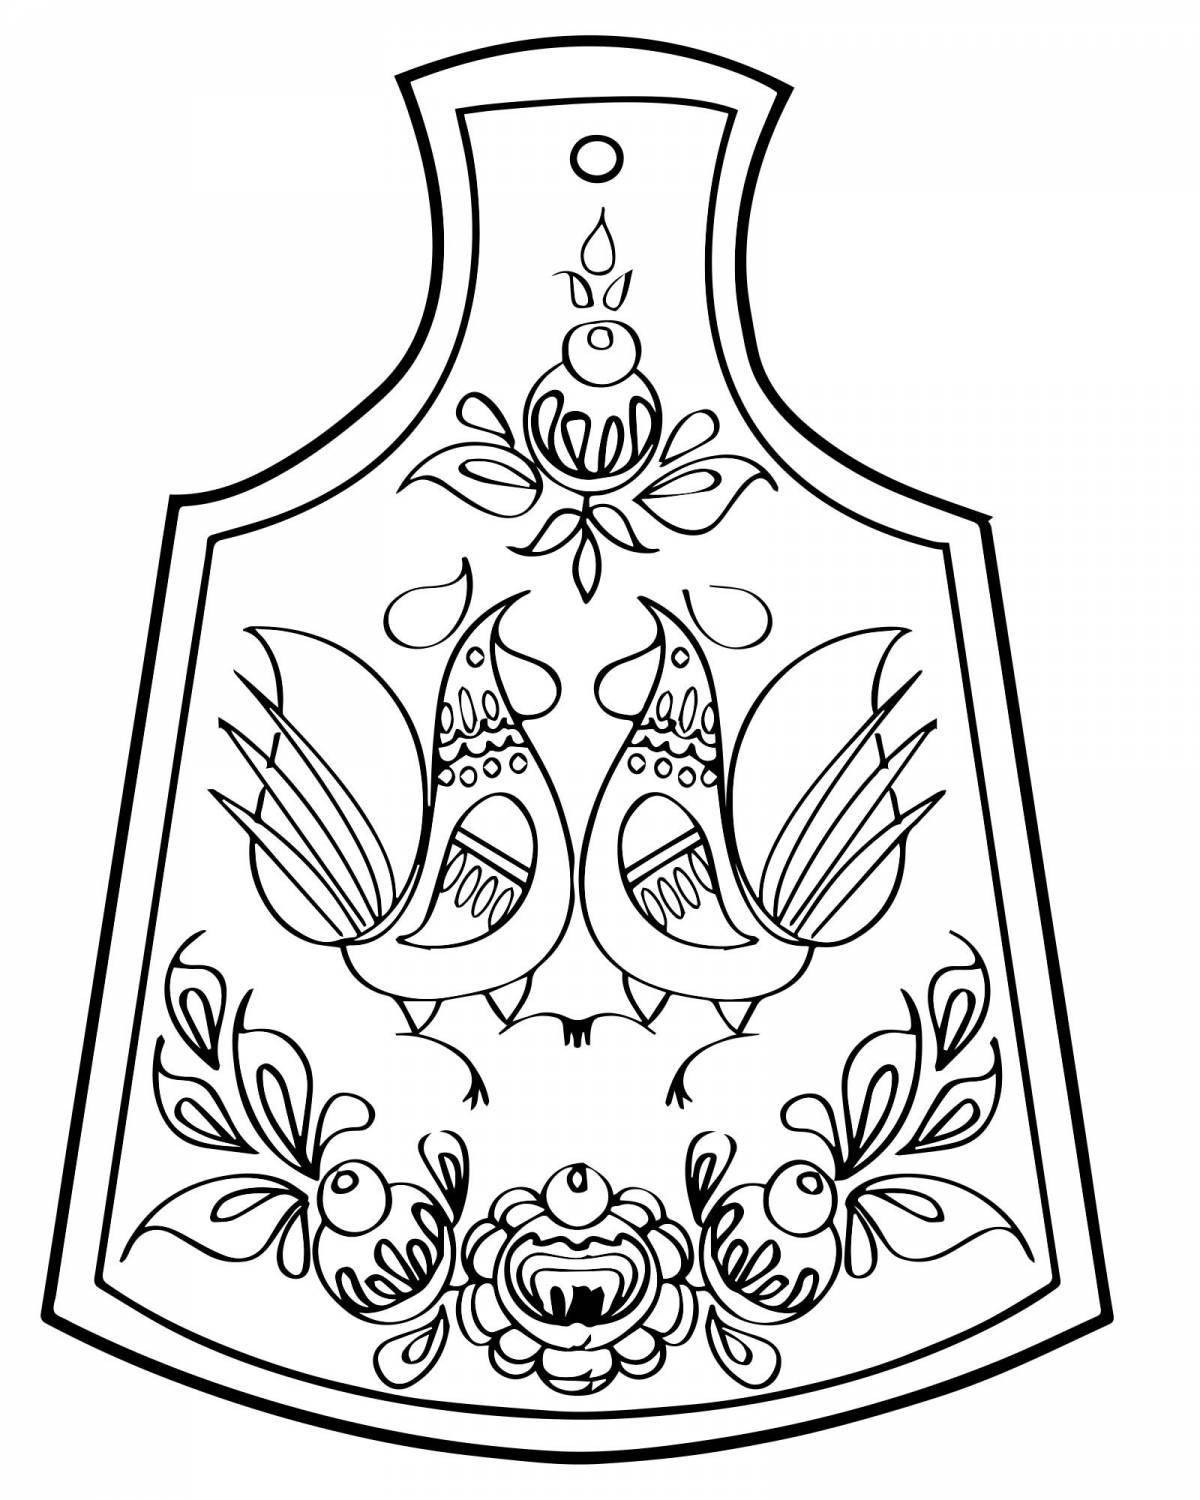 Coloring pages attractive Gorodets patterns